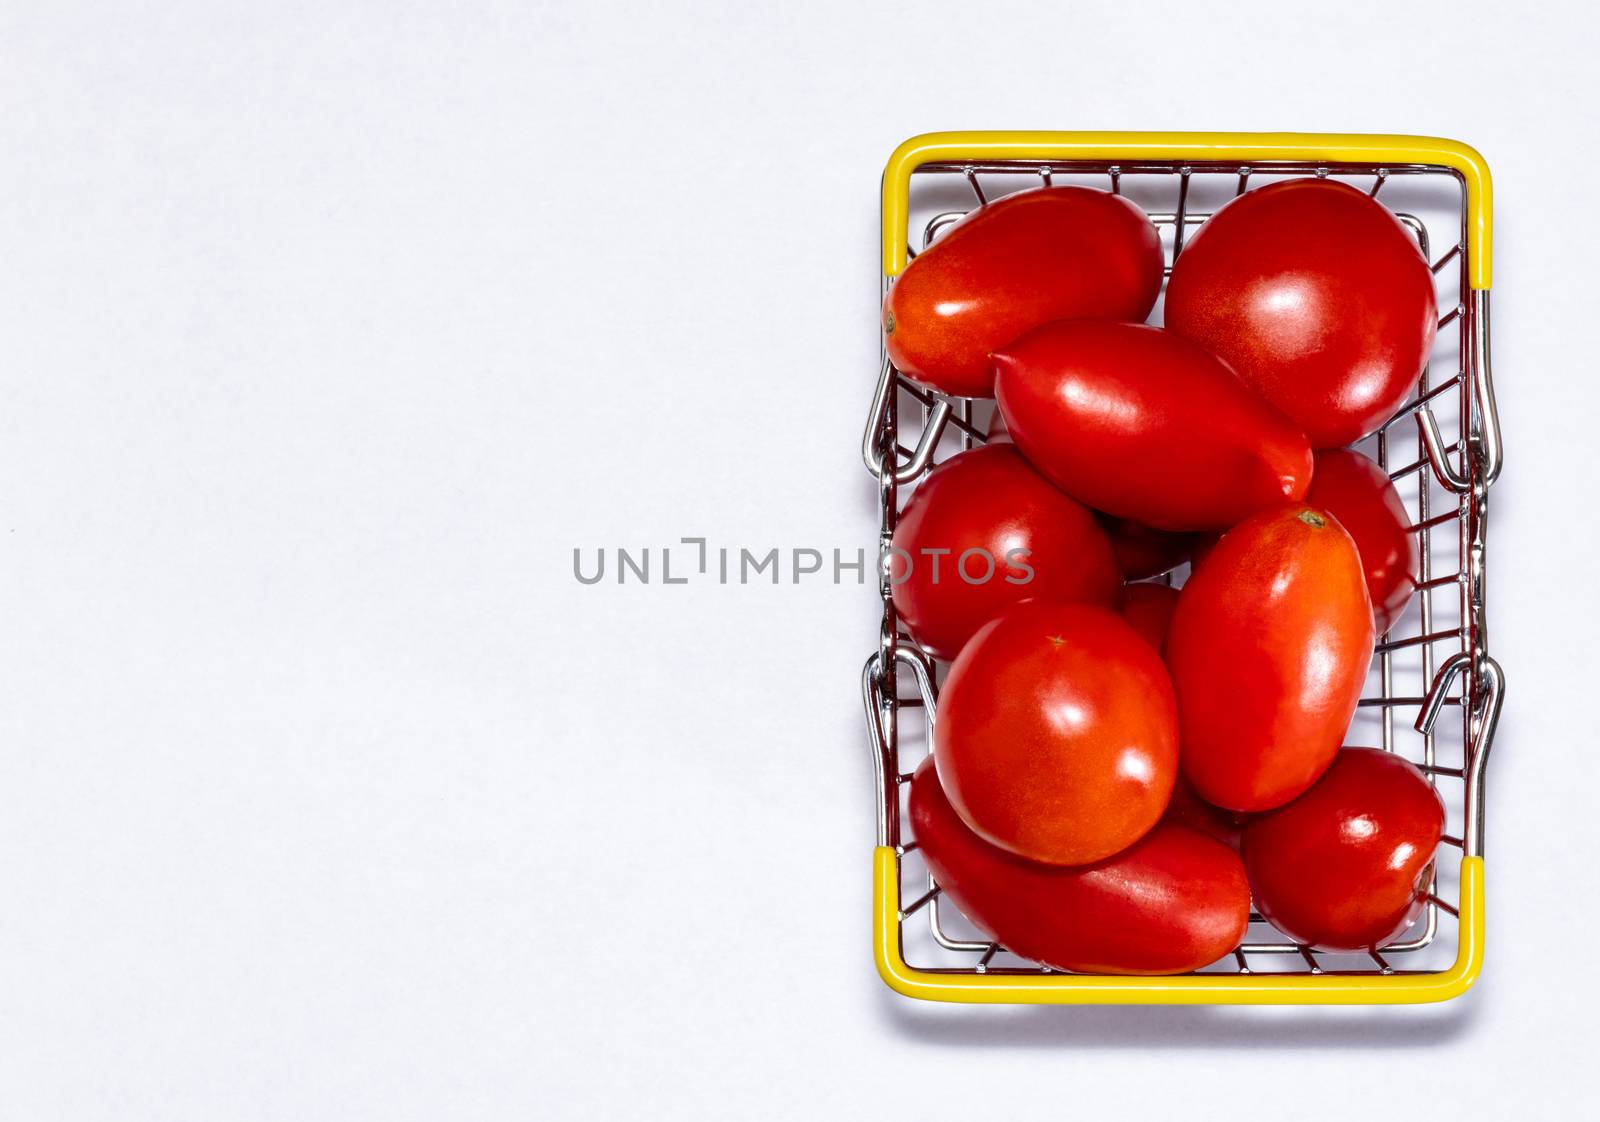 Shot of tomatoes in shopping basket isolated on white background with copy space. Ripe tasty red tomatos in shopping basket. Top view. Tomato trading concept. Online shopping concept. Copy space.